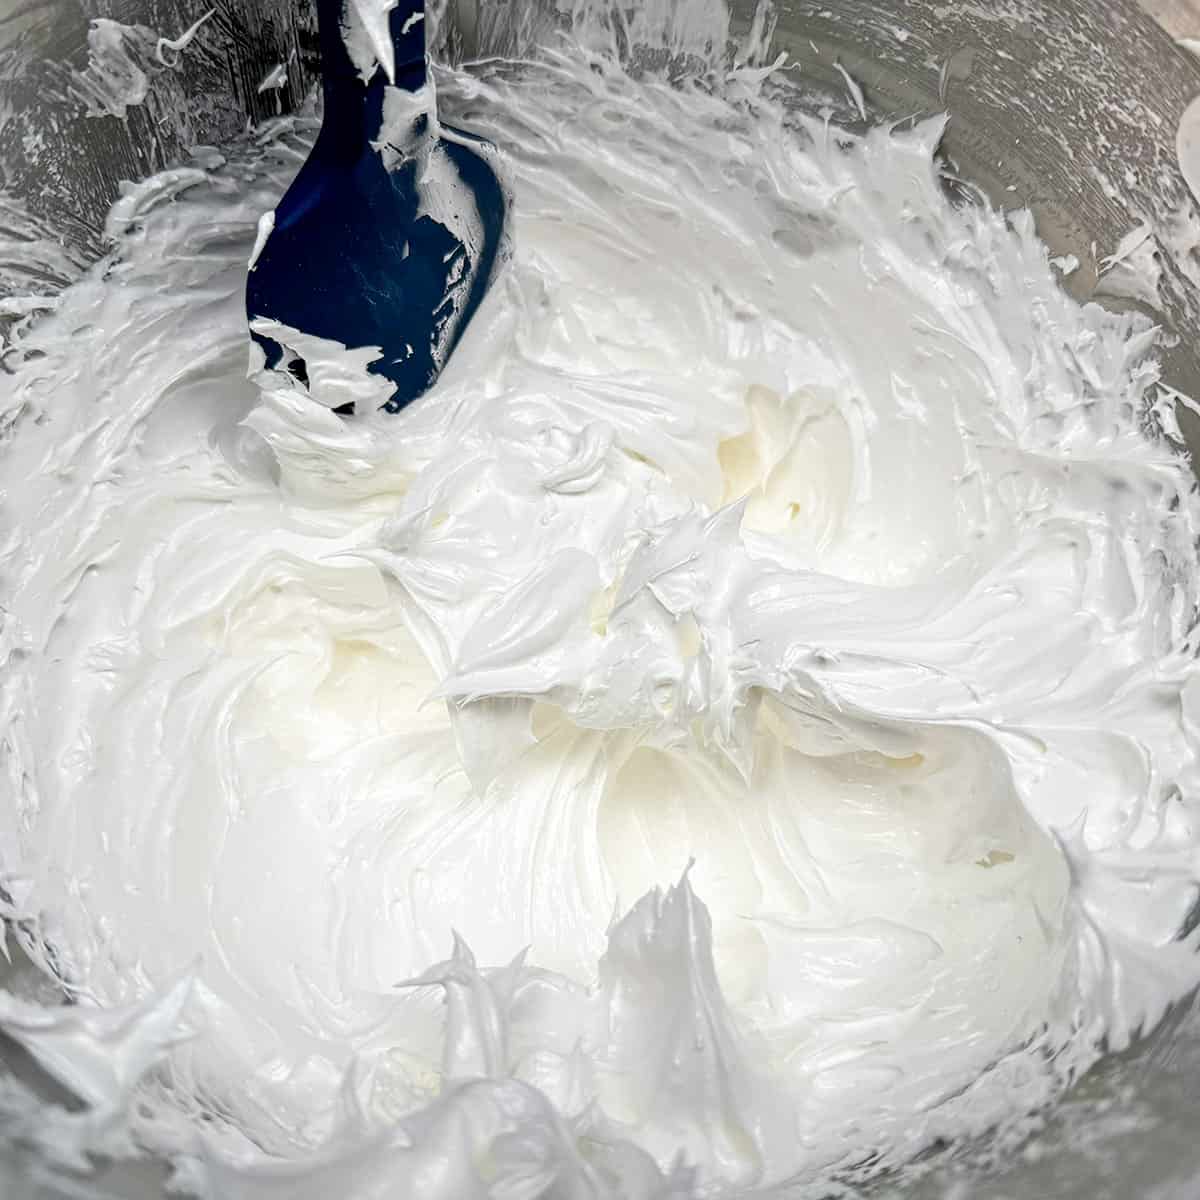 Meringue is in a mixer bowl, is shiny, and has stiff peaks.